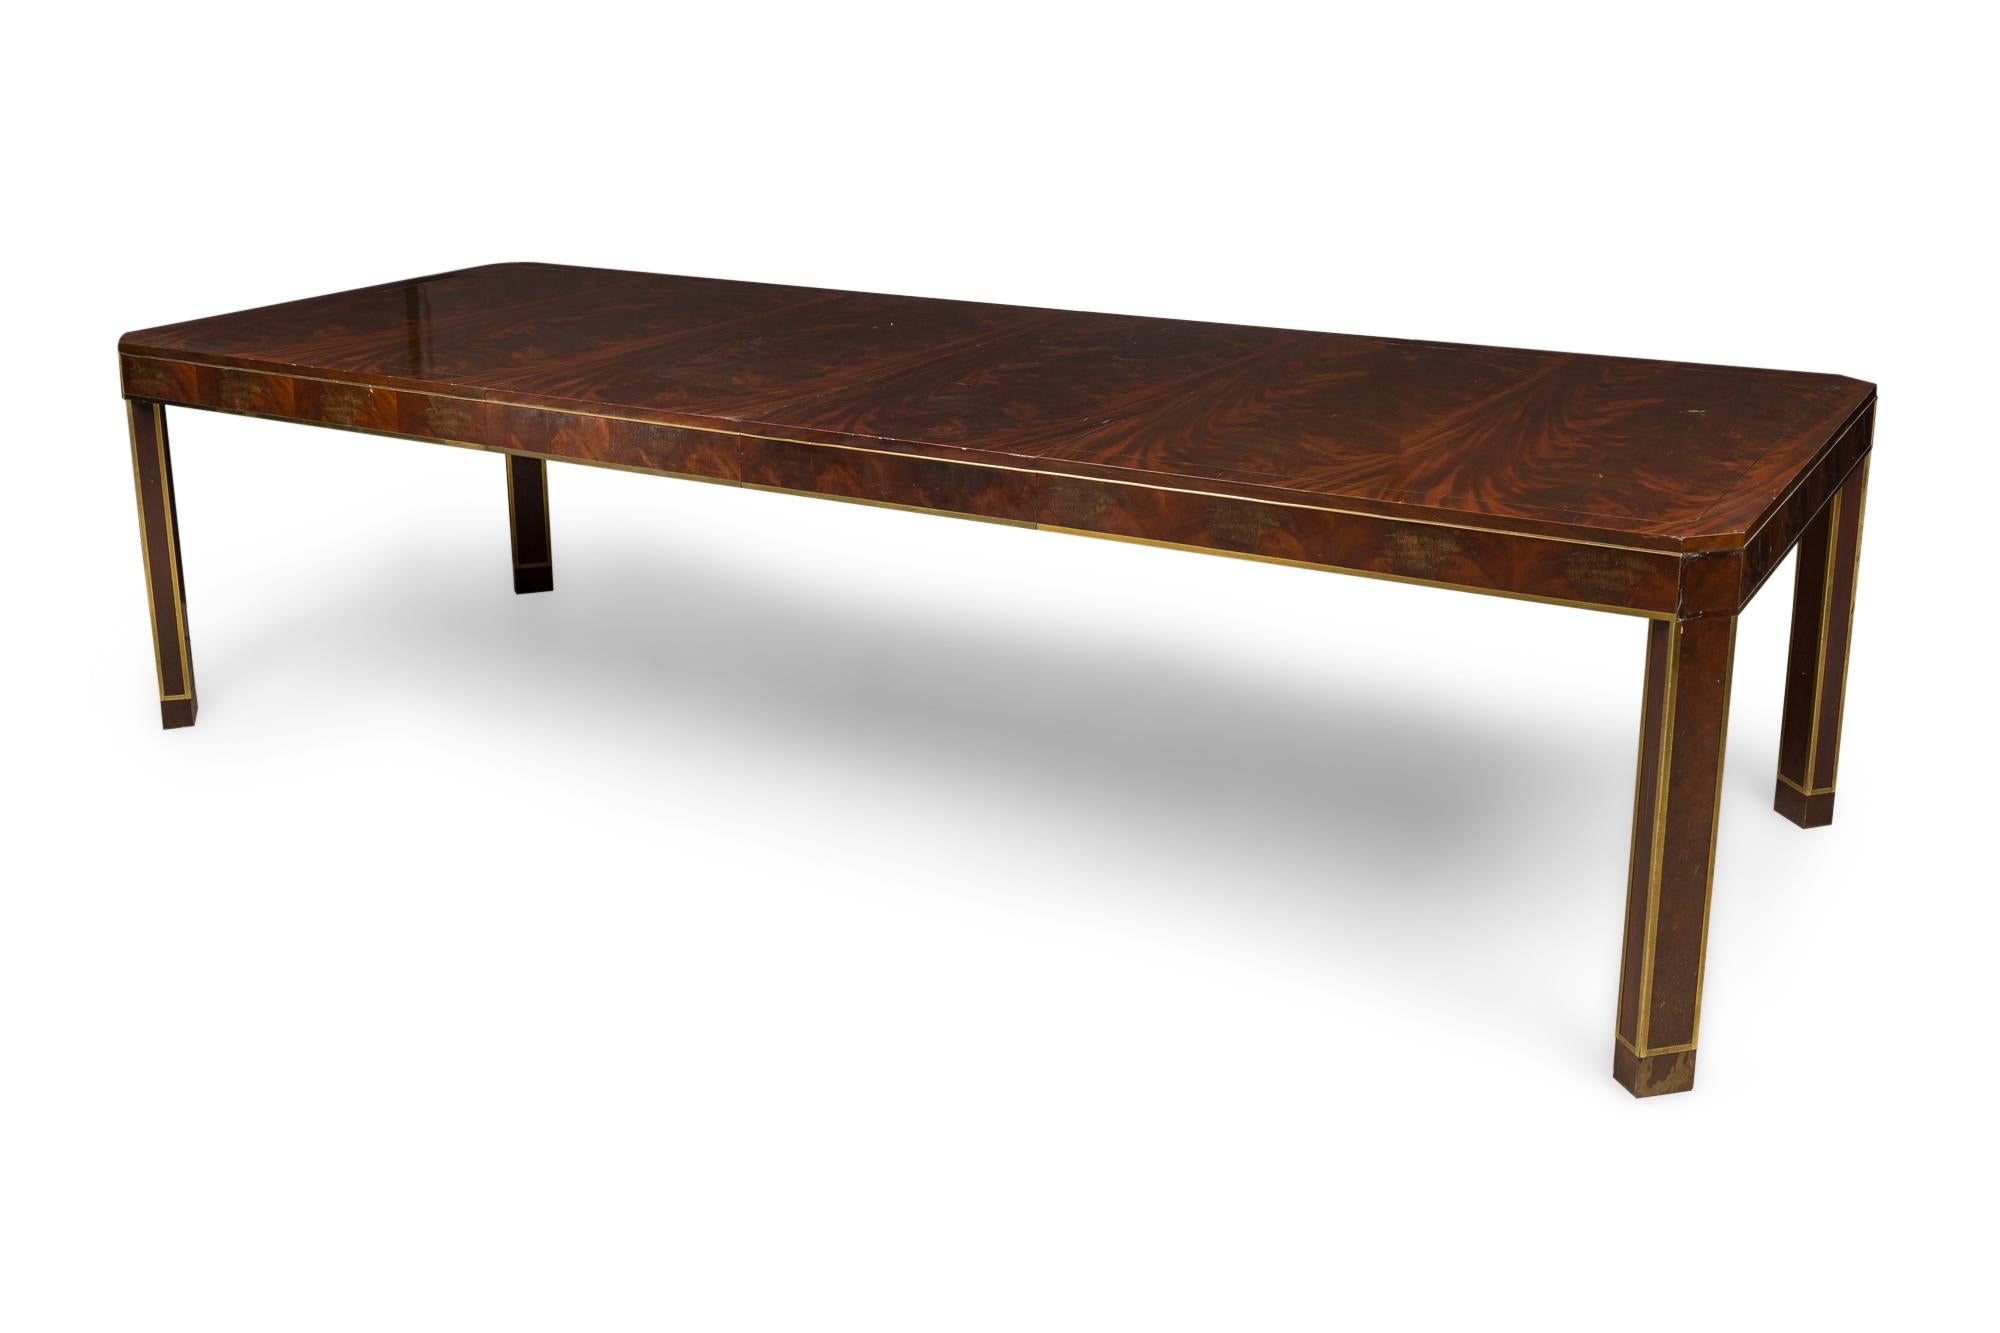 Russian Flame Mahogany Brass Trimmed Extention Dining / Conference Table For Sale 5